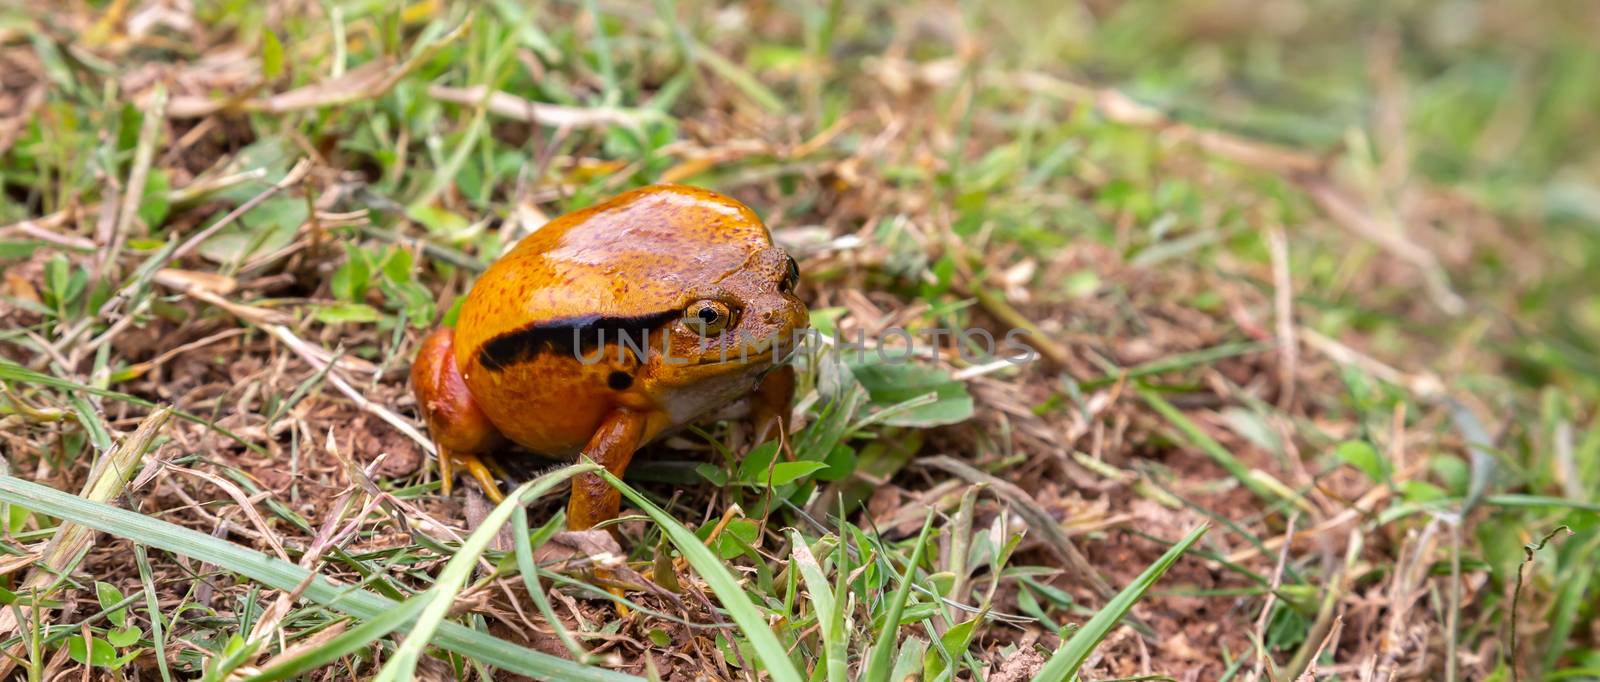 A large orange frog is sitting in the grass by 25ehaag6